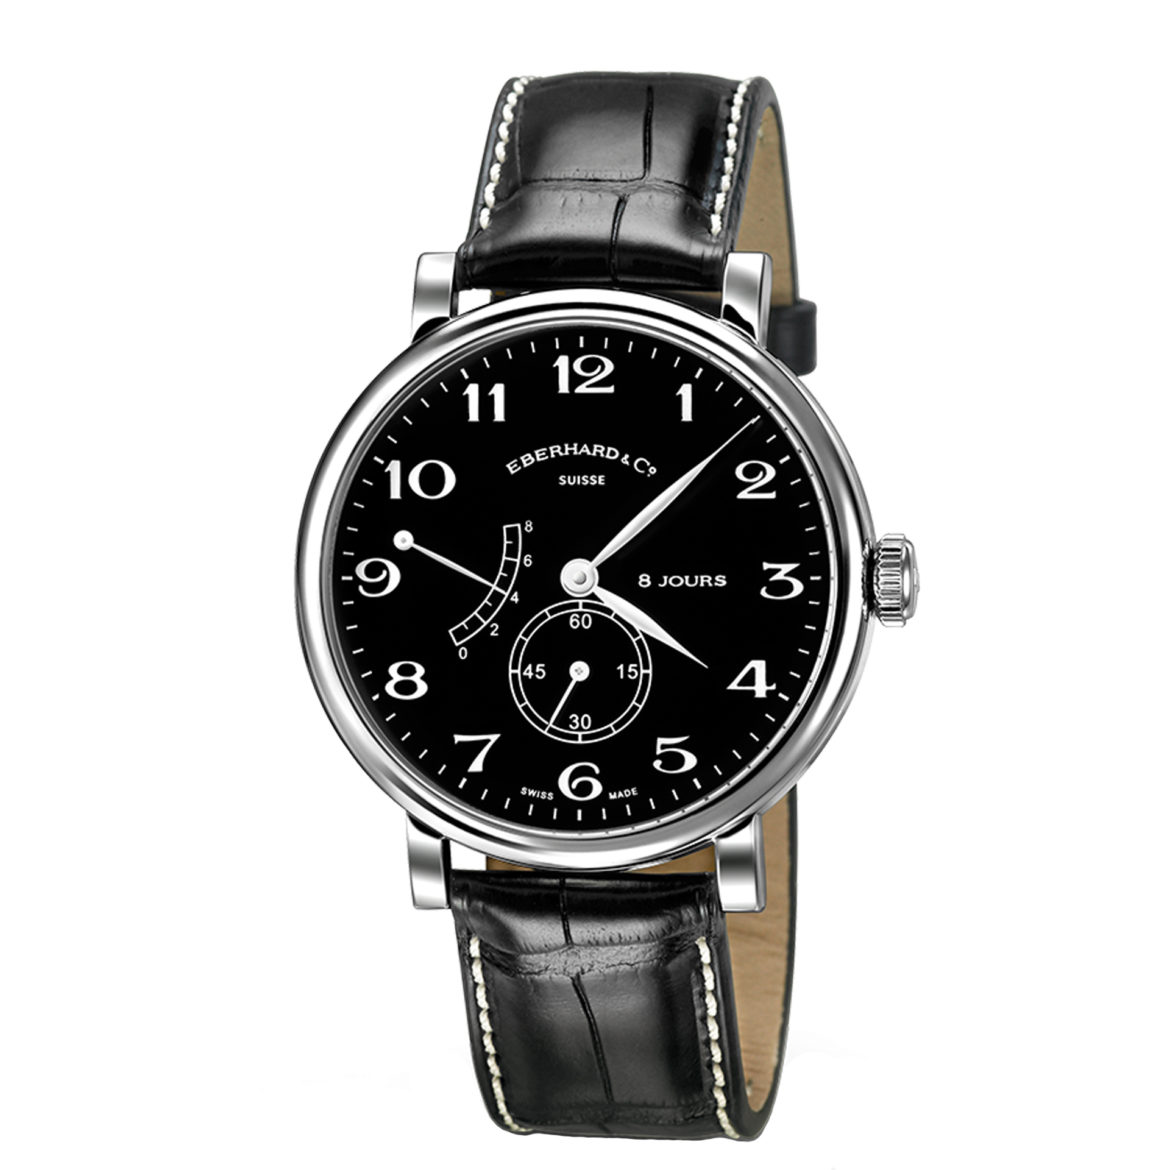 Eberhard & Co. 8 Jours Grande Taille - Your Watch Hub